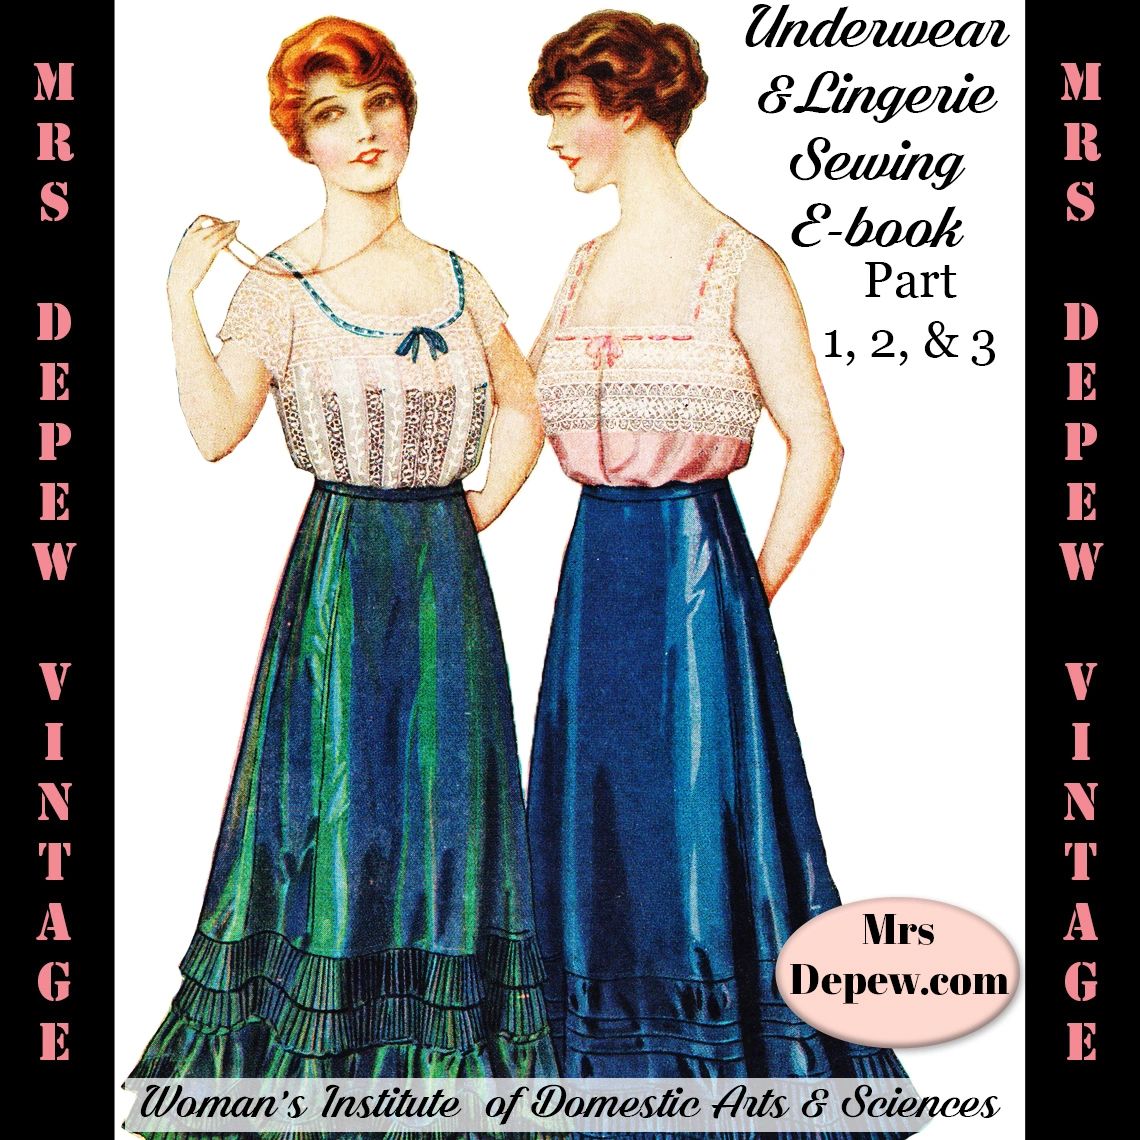 Vintage Sewing Book 1910s Underwear and Lingerie Ebook Parts 1, 2, 3 Huge  How To E-book -DOWNLOAD PDF